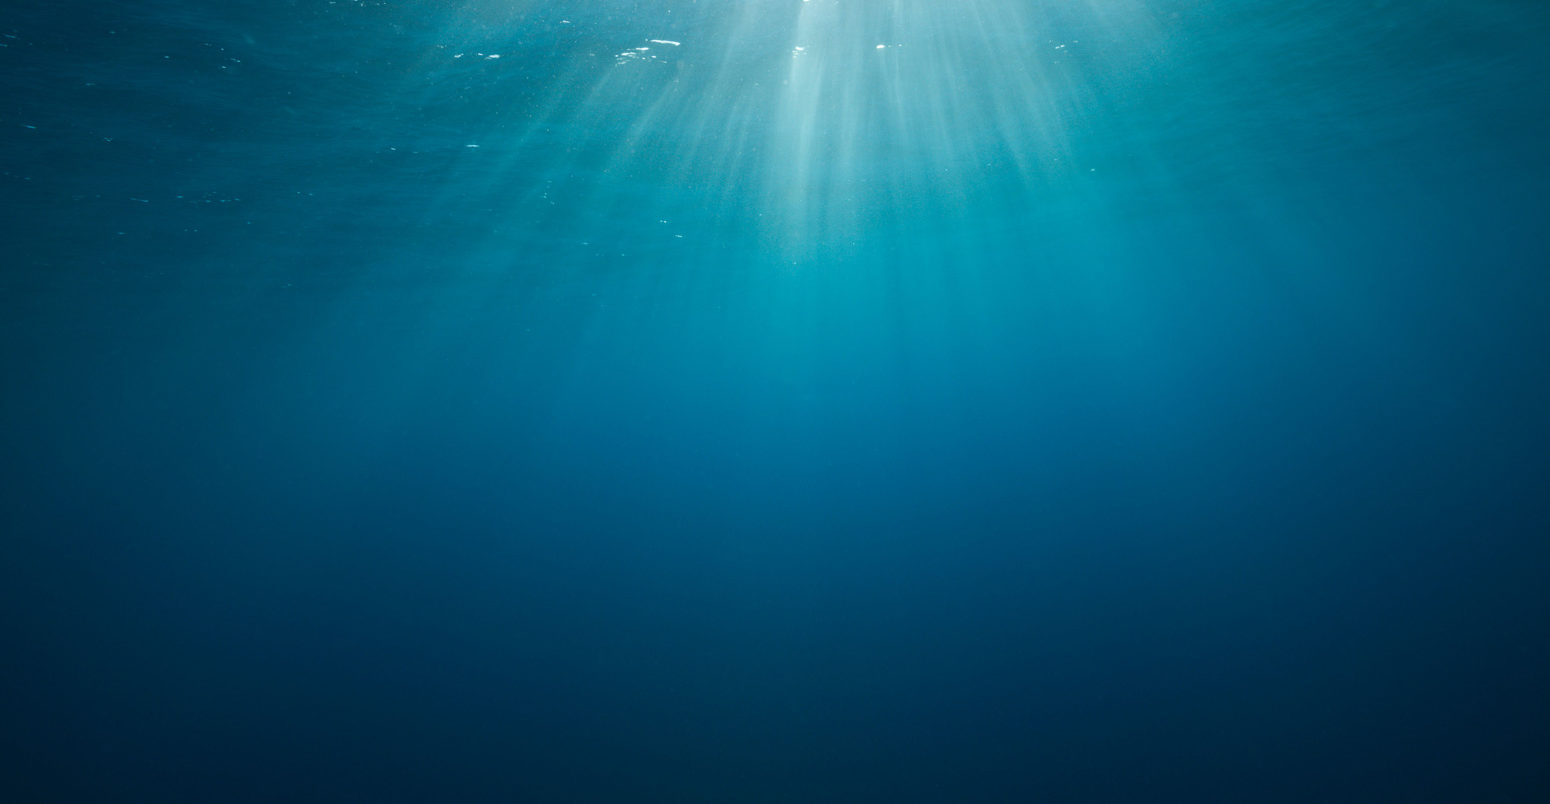 Guest post: The oceans are absorbing more carbon than previously thought